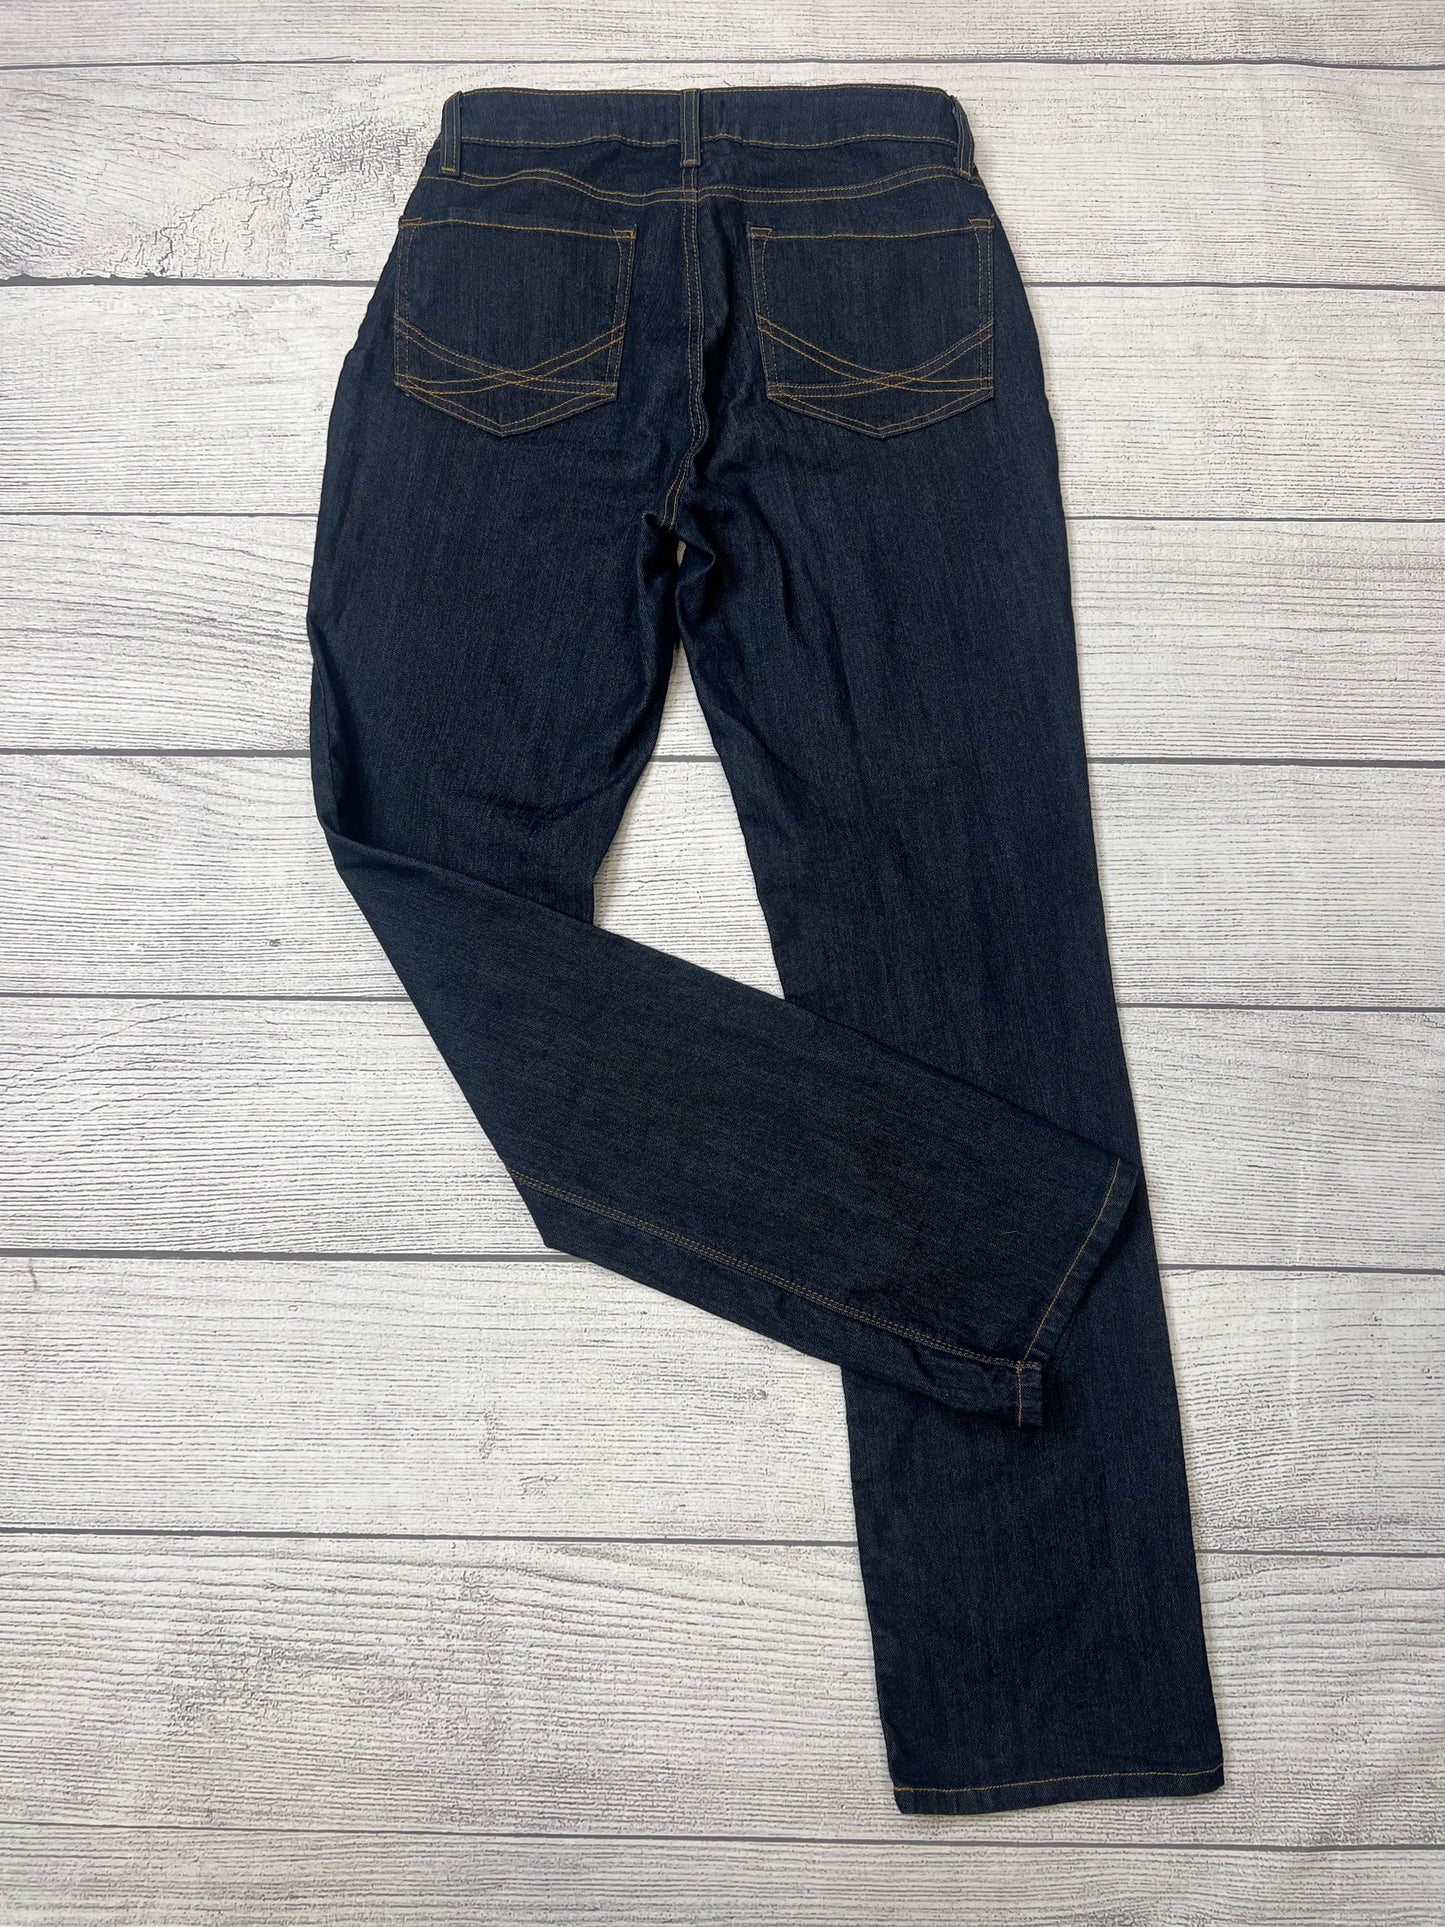 Jeans Designer By Not Your Daughters Jeans  Size: 8